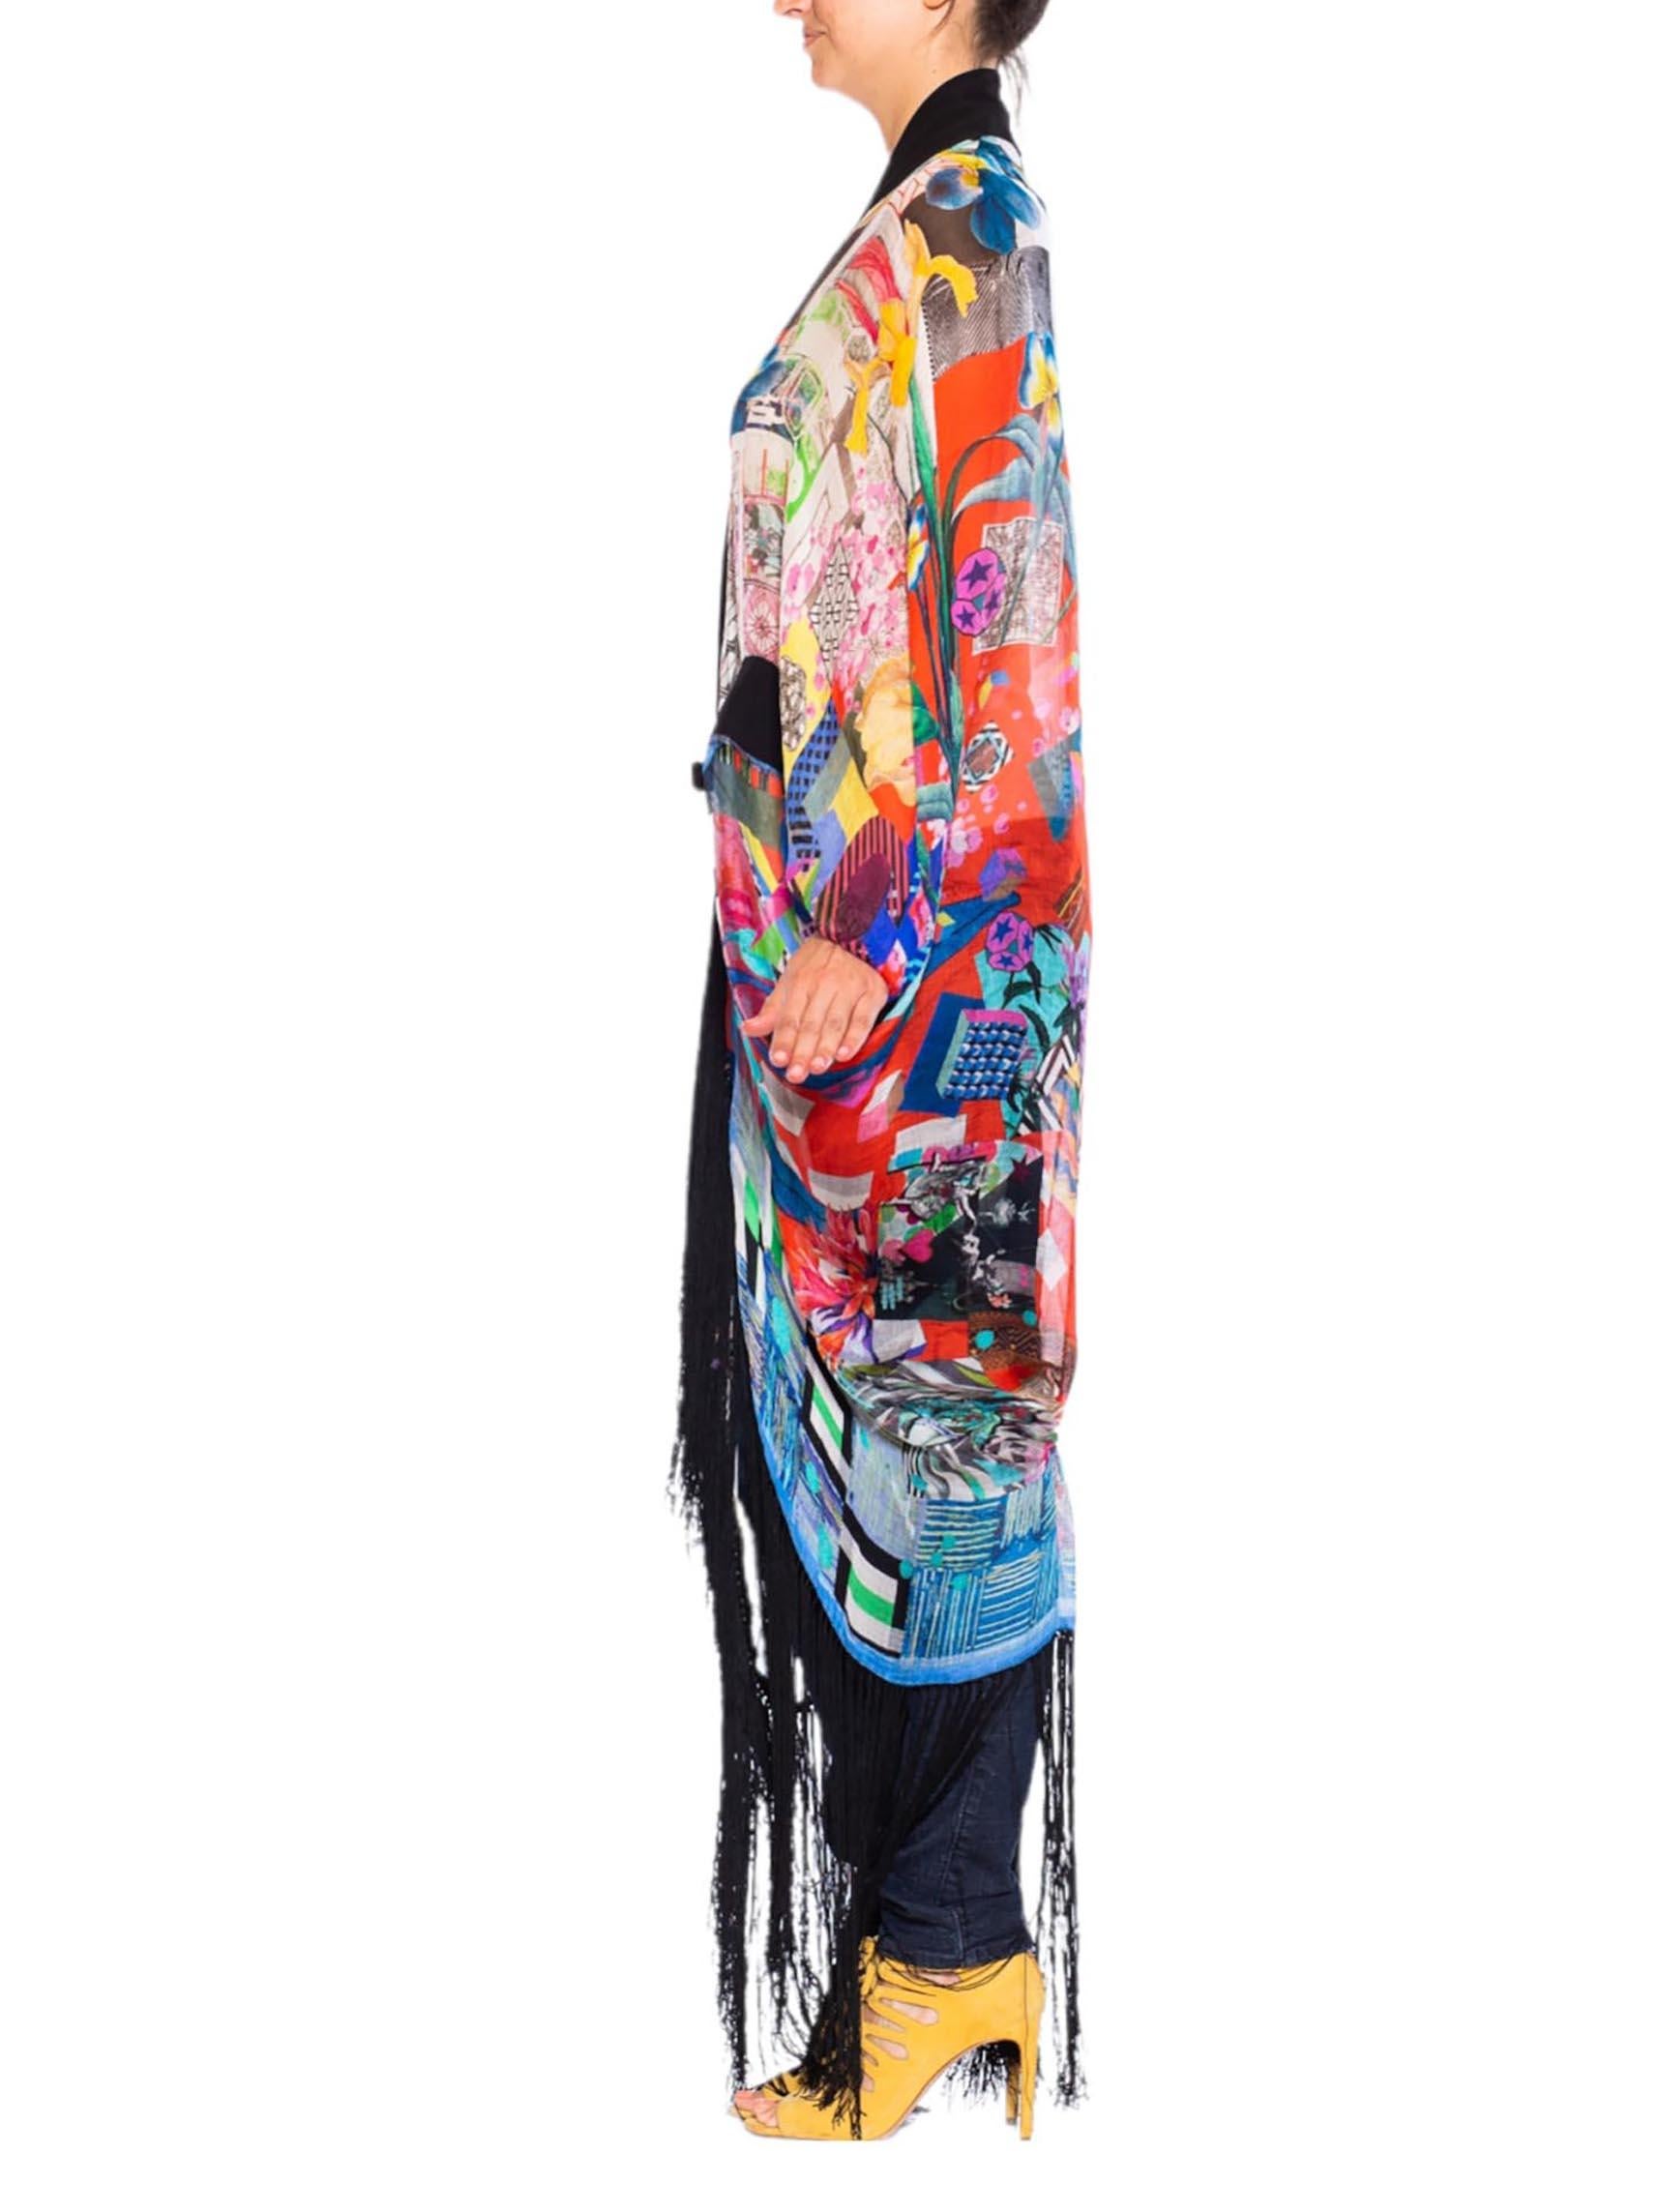 Made from a vintage Christian Lacroix Scarf MORPHEW COLLECTION Silk Chiffon Christian Lacroix Cocoon With Fringe 
MORPHEW COLLECTION is made entirely by hand in our NYC Ateliér of rare antique materials sourced from around the globe. Our sustainable